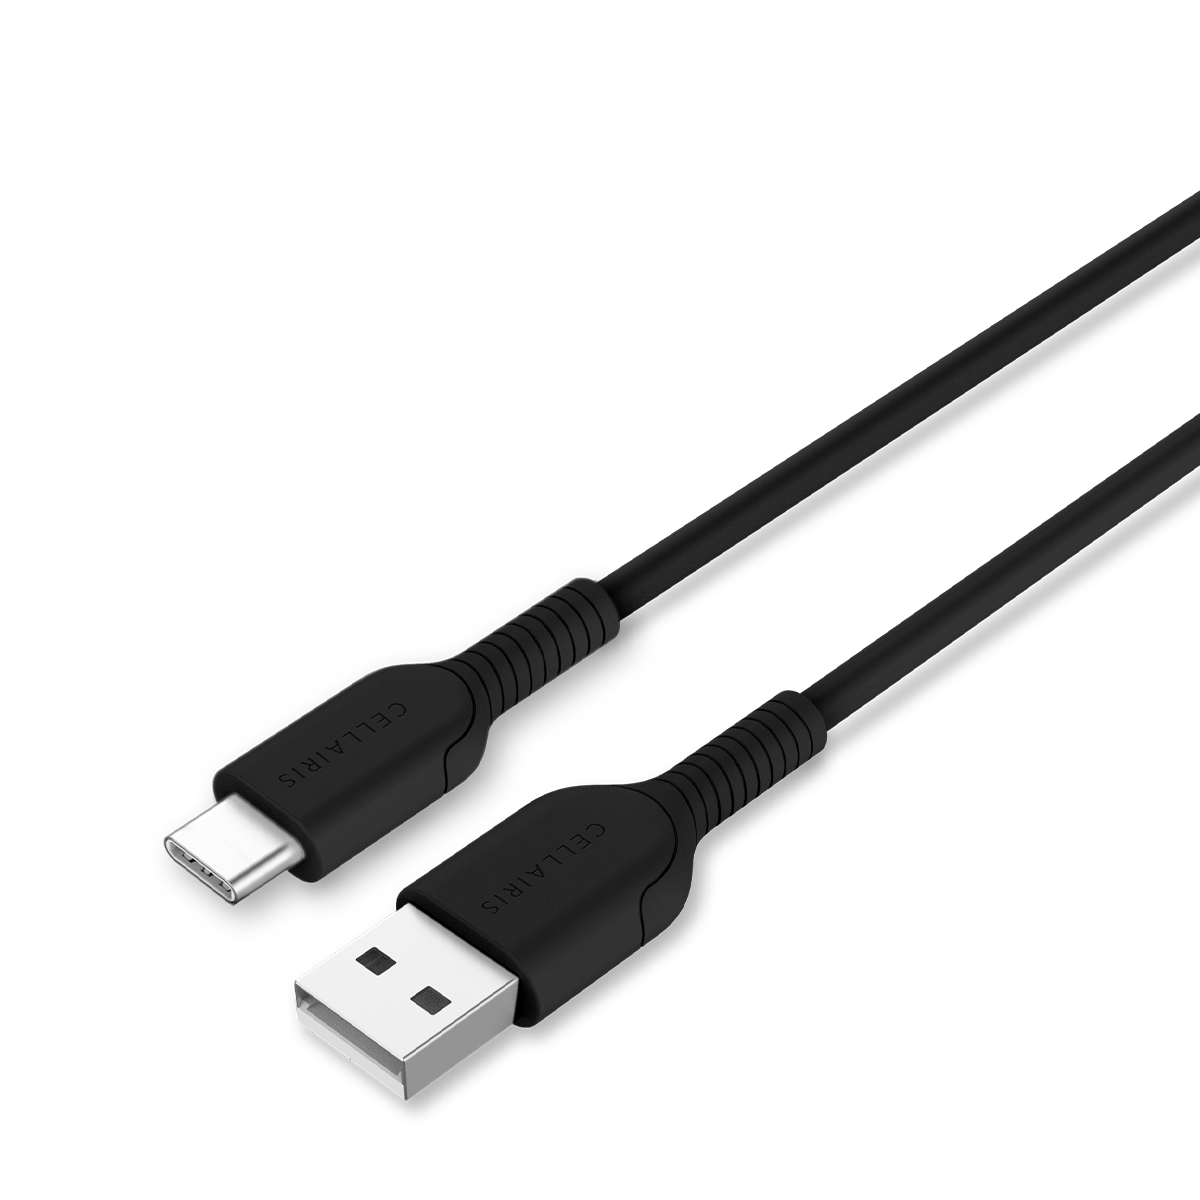 Charge Cable - 3FT USB-C to USB-A Black Power